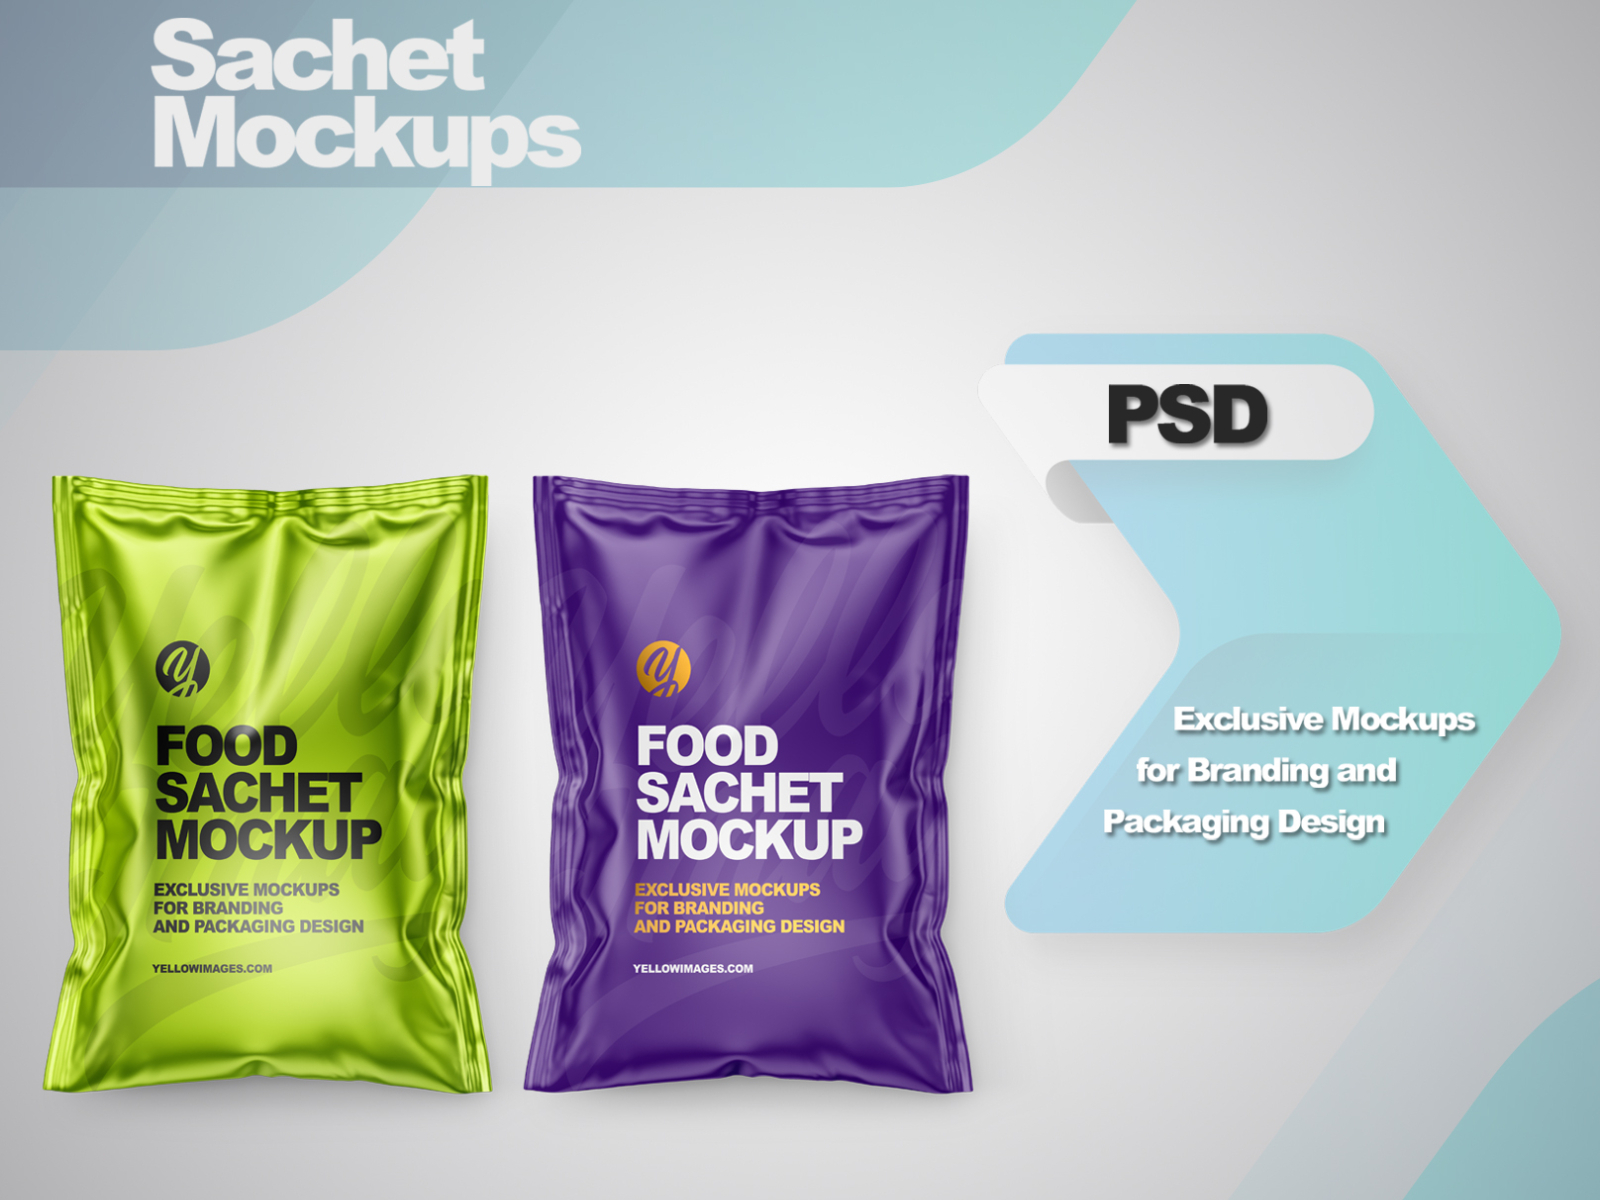 Download Sachets Mockups By Andrey Gapon On Dribbble Yellowimages Mockups